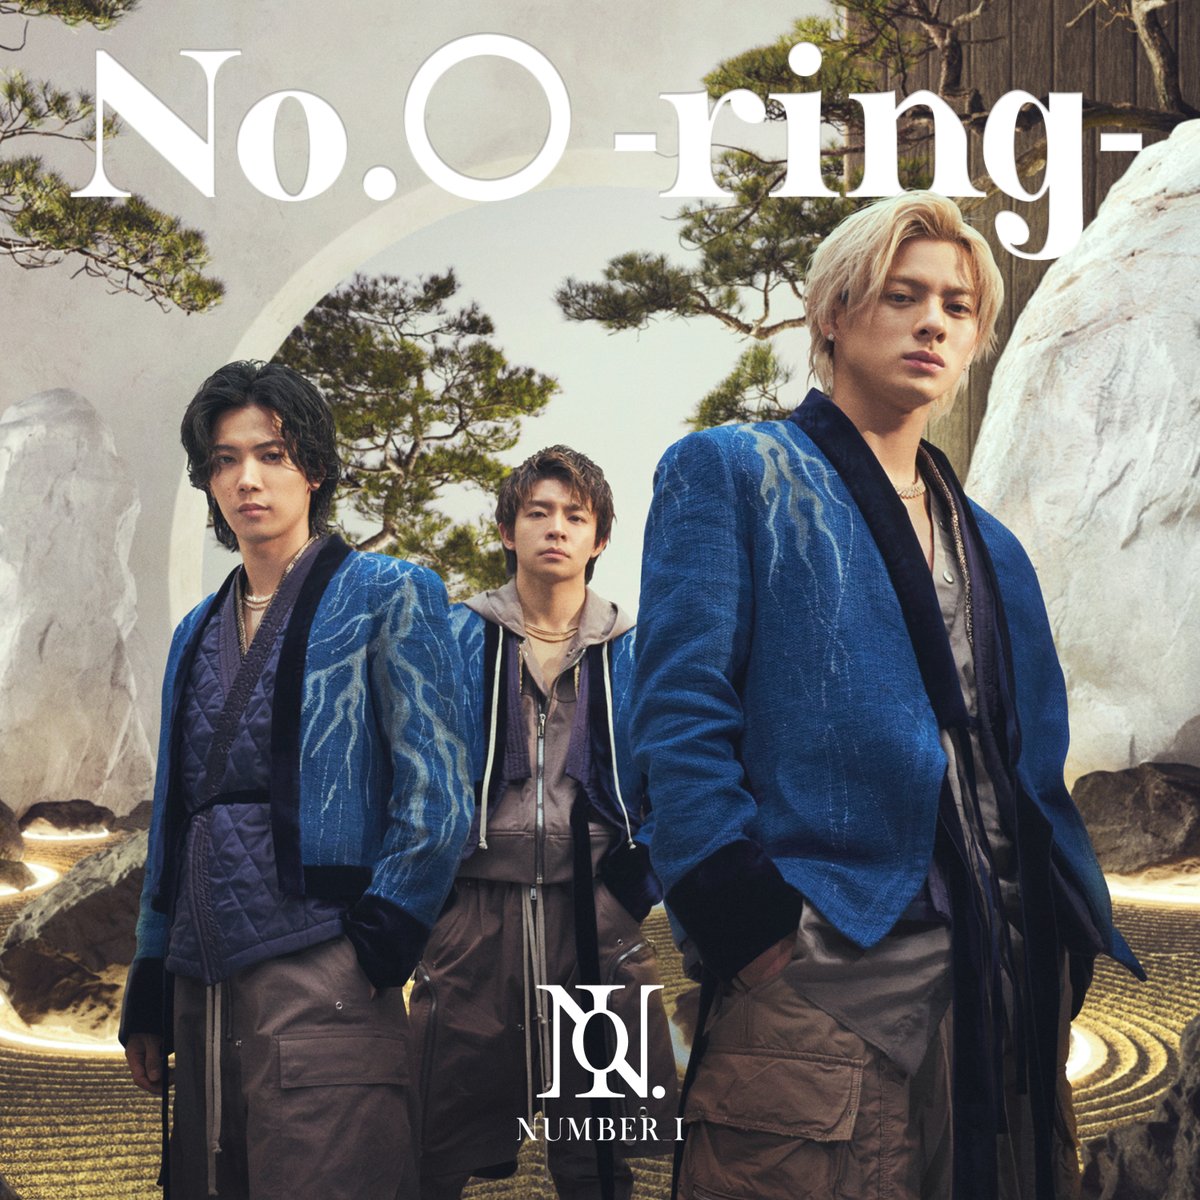 HALLYU IL NEW MUSIC We got BON from NUMBER_I's mini album 'No.O -ring-' Make sure to tune in this Sun, we have it in our playlist. #Number_I @number_i_staff @tobeofficial_jp @tobeofficial_eb #BON #HALLYUIL923newmusic @UMG_Ph @UMUSIC_Ph #hallyu #jpop